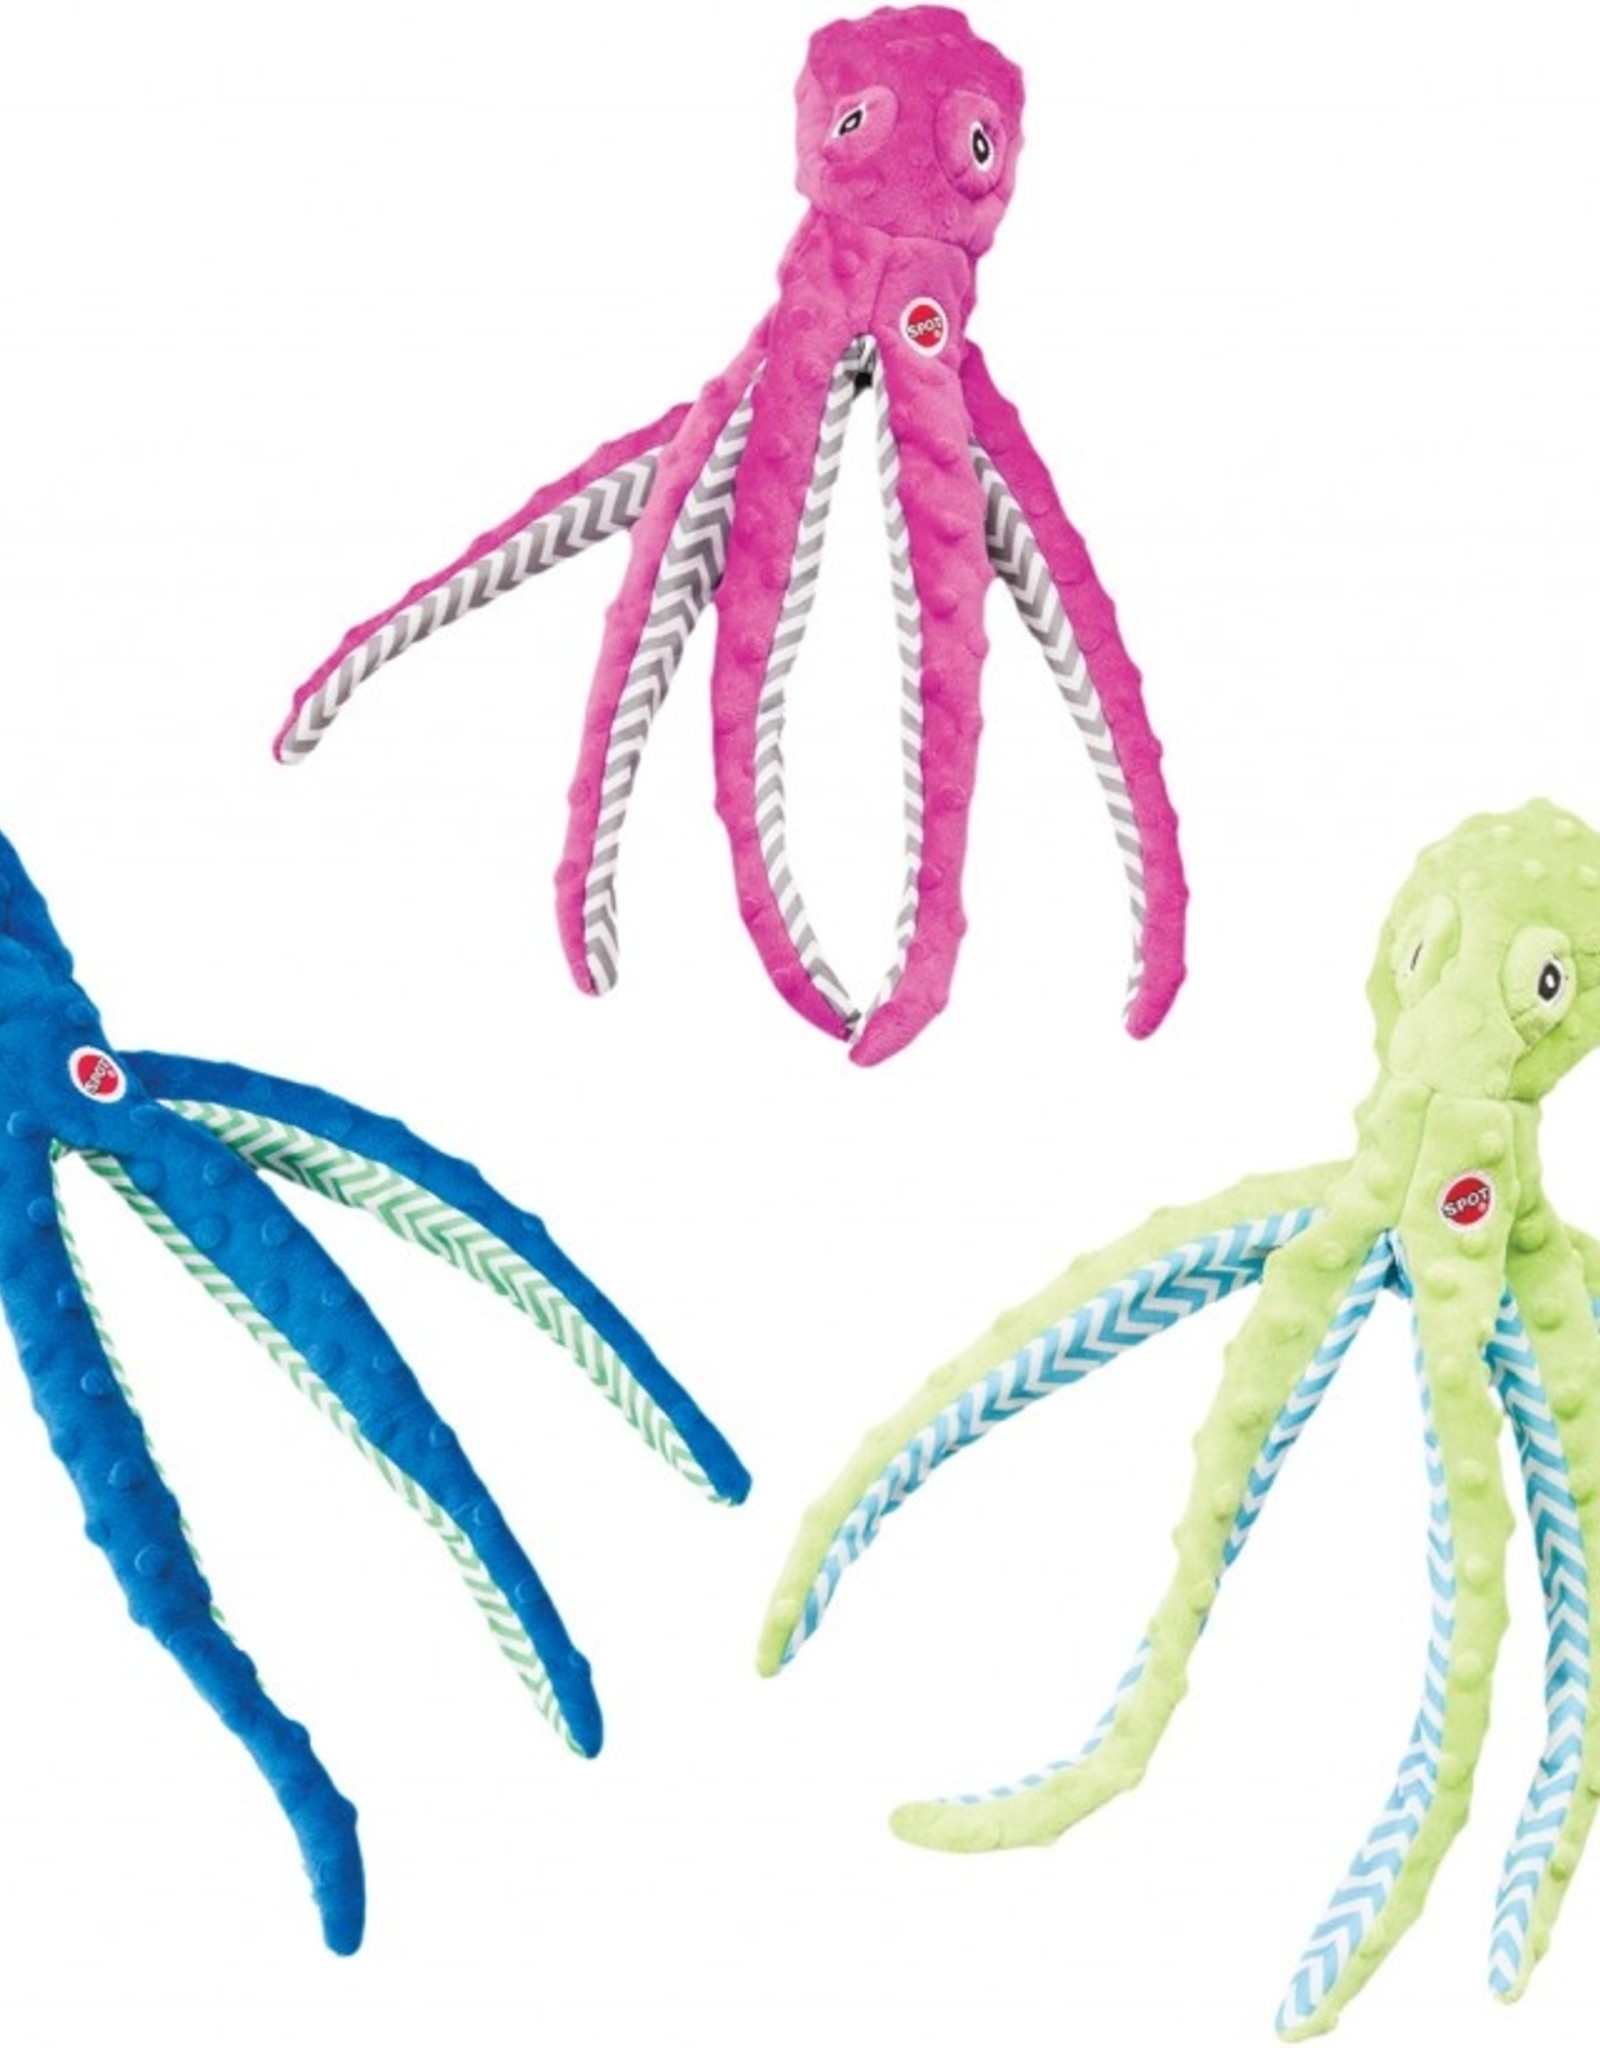 ETHICAL PRODUCTS, INC. SKINNEEEZ EXTREME OCTOPUS ASSORTED 16IN